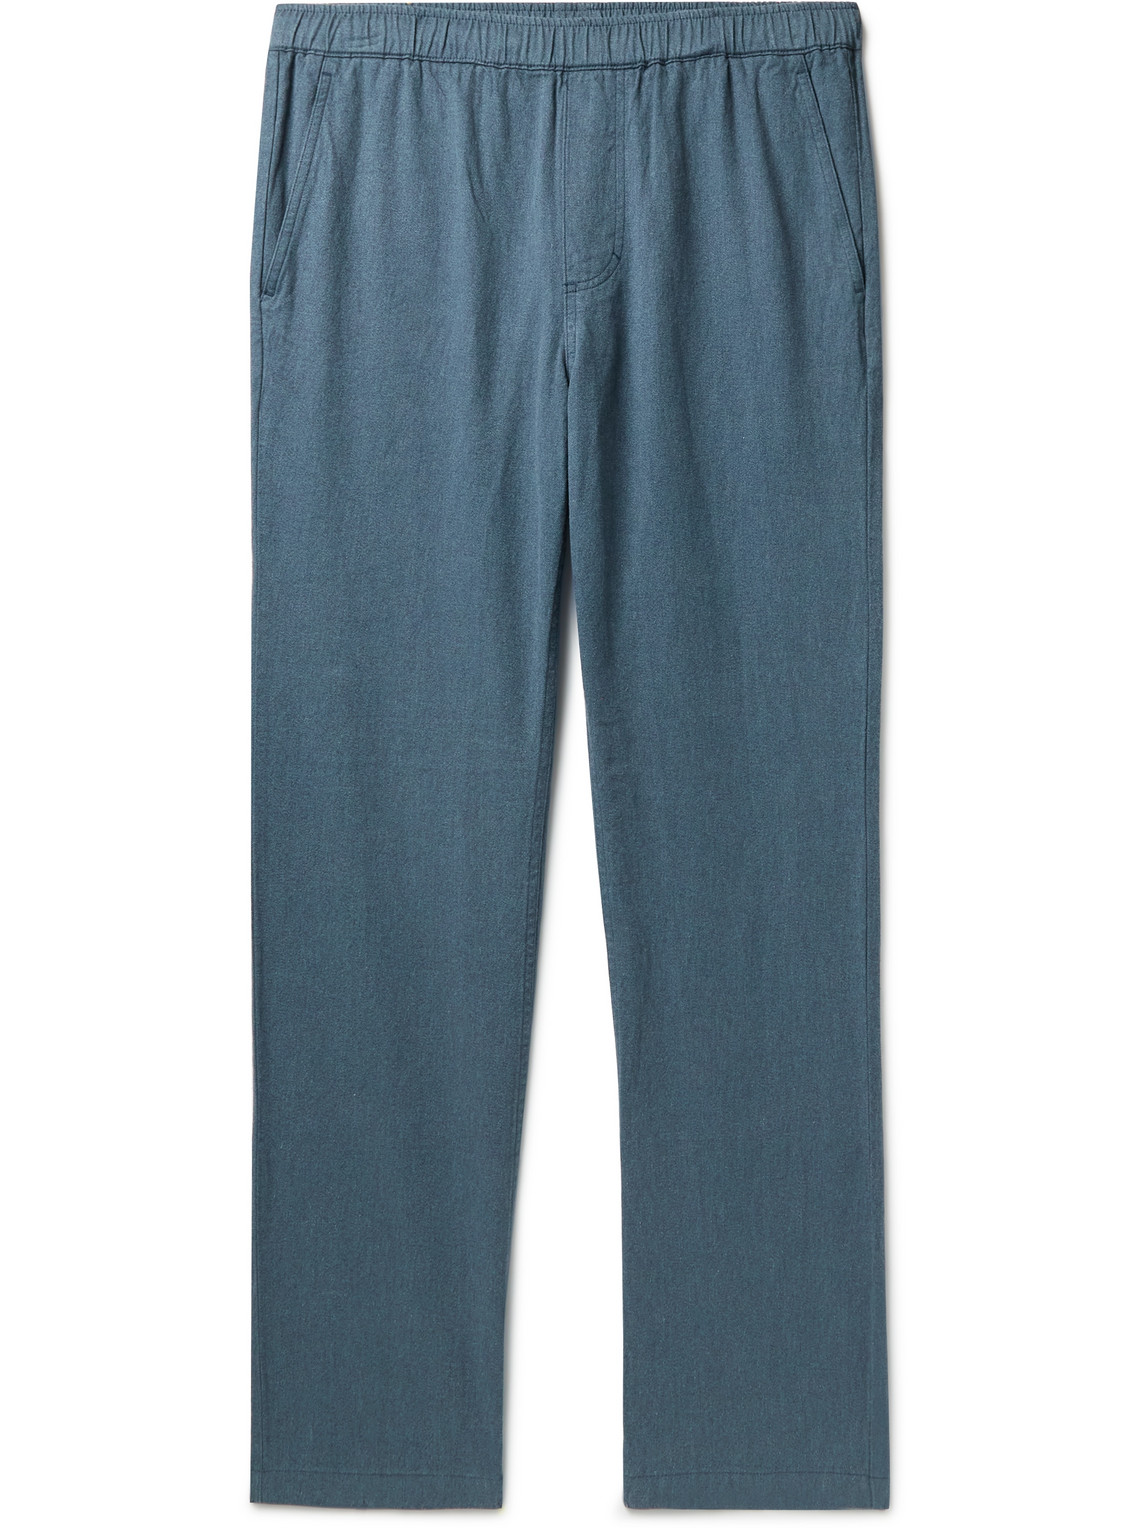 Outerknown Verano Beach Slim-fit Hemp And Organic Cotton-blend Trousers In Blue